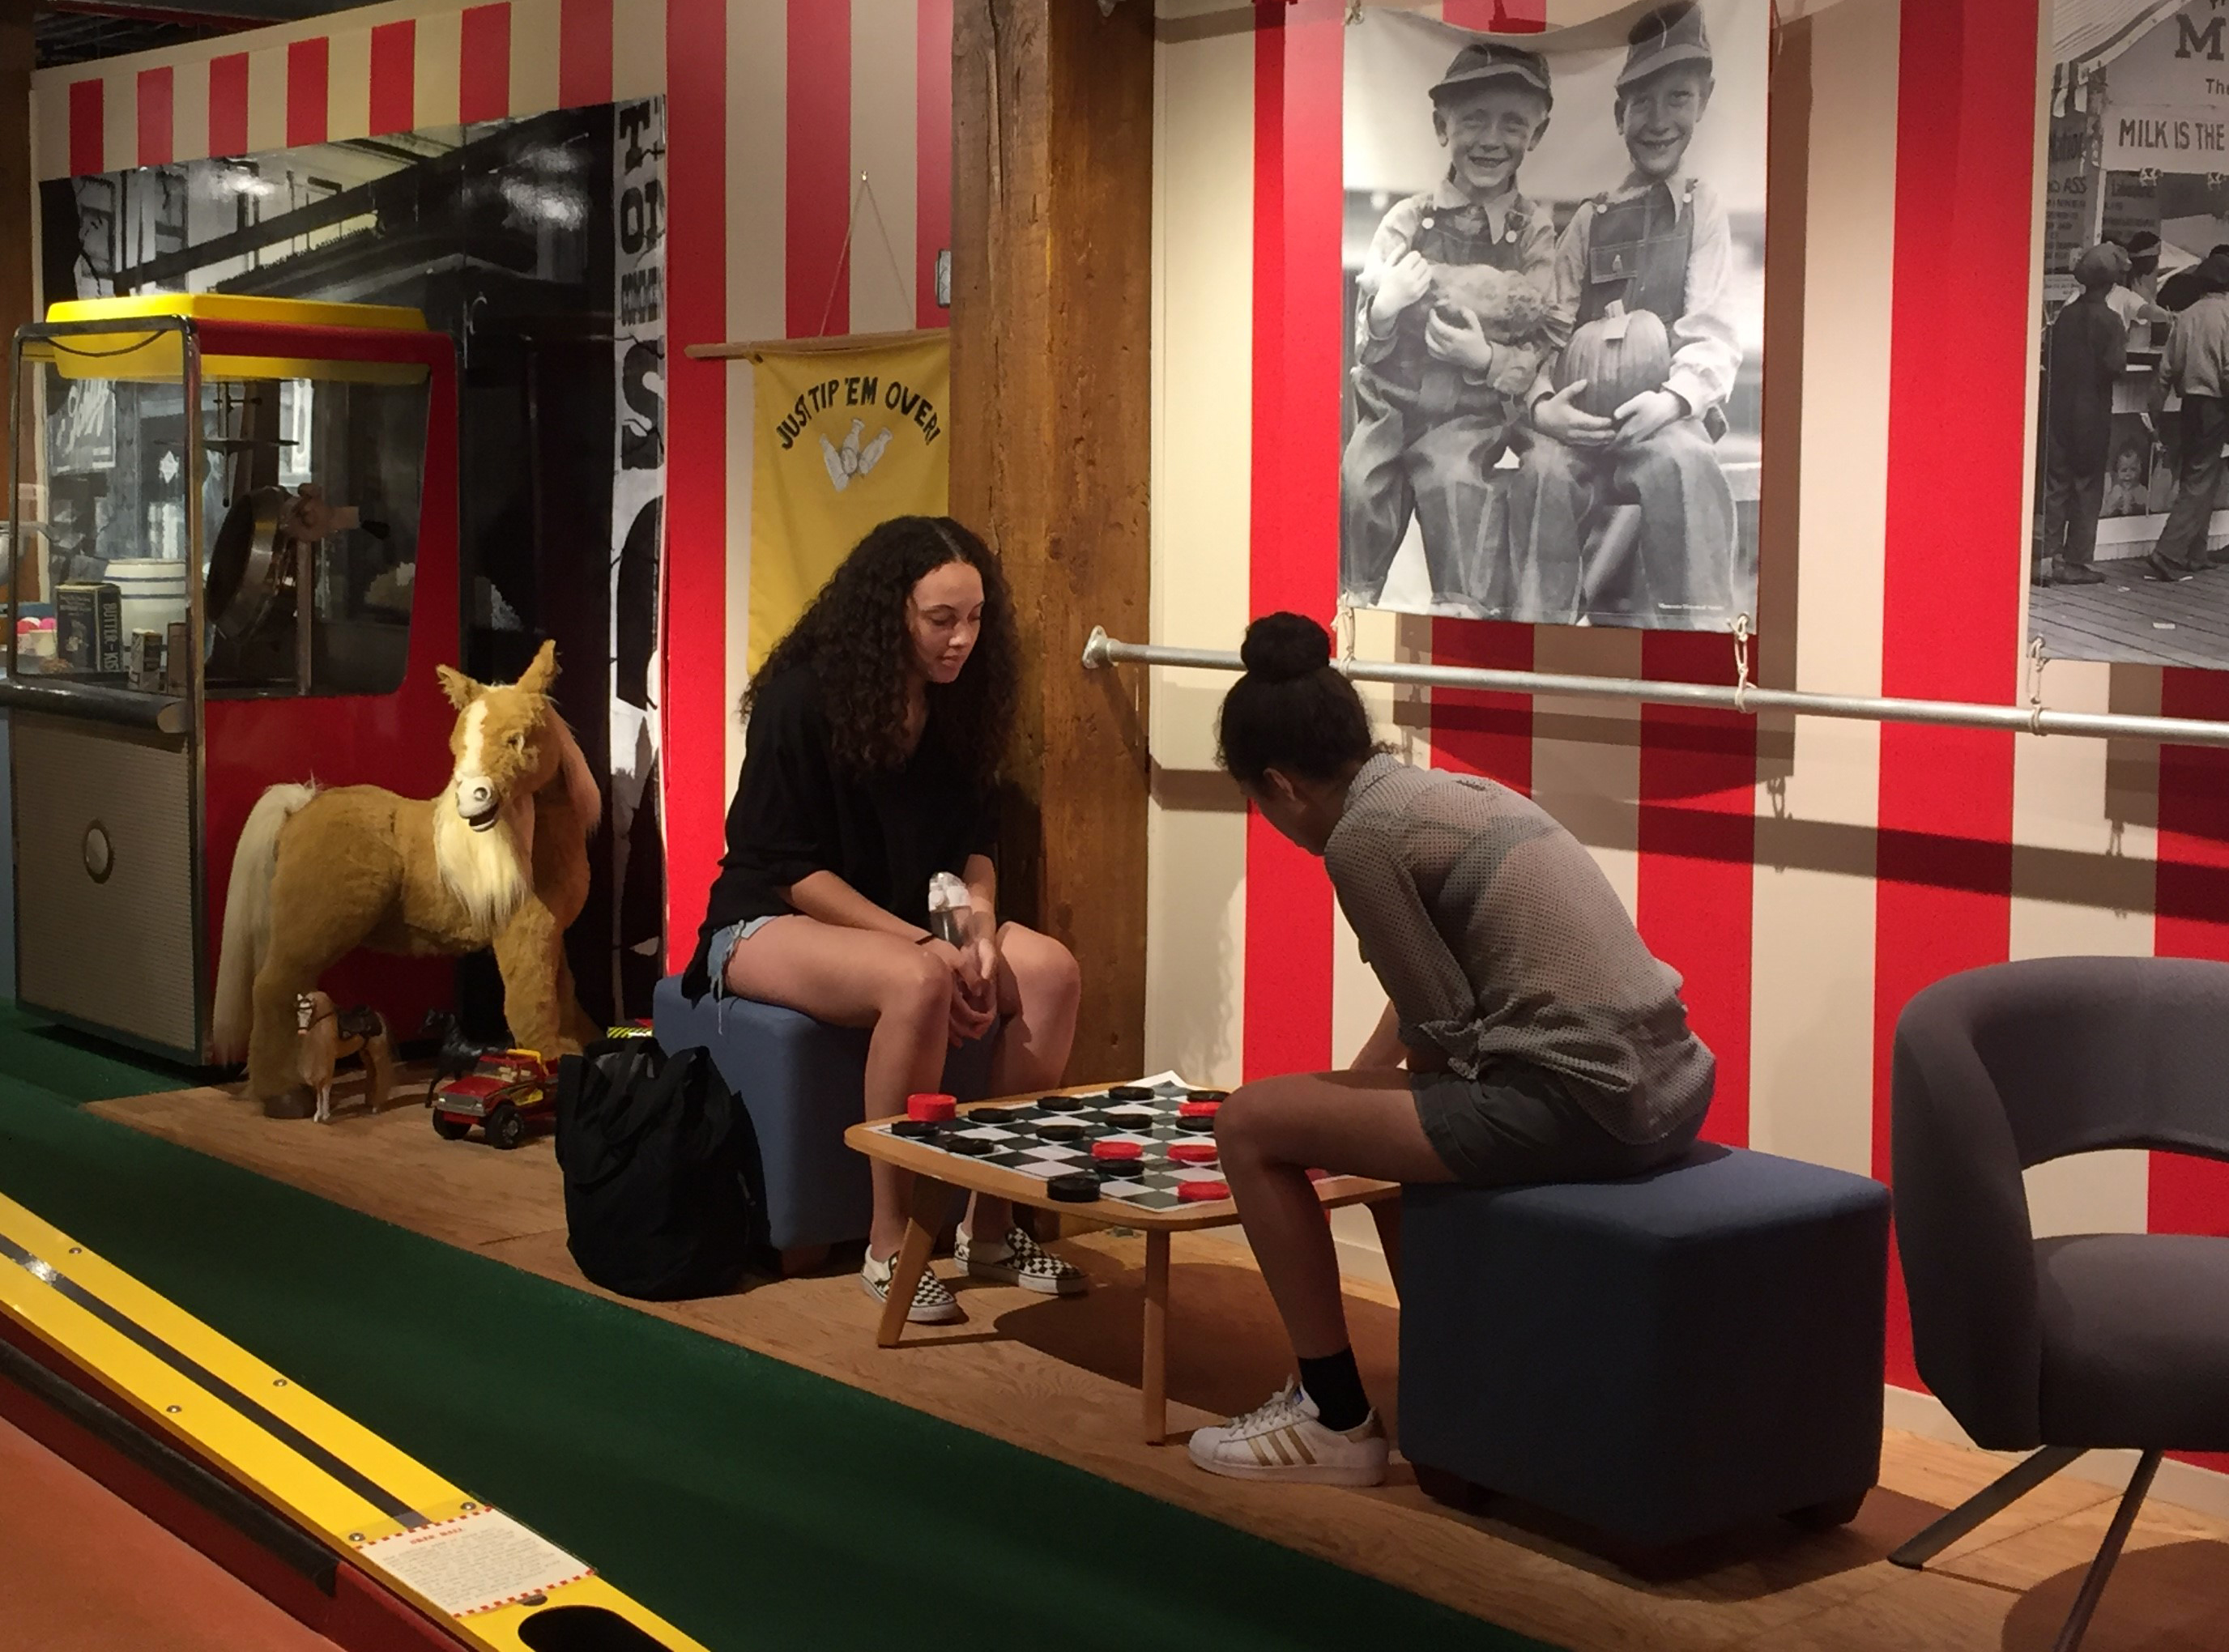 JWU students playing checkers at Country Fair exhibit at JWU's Culinary Arts Museum